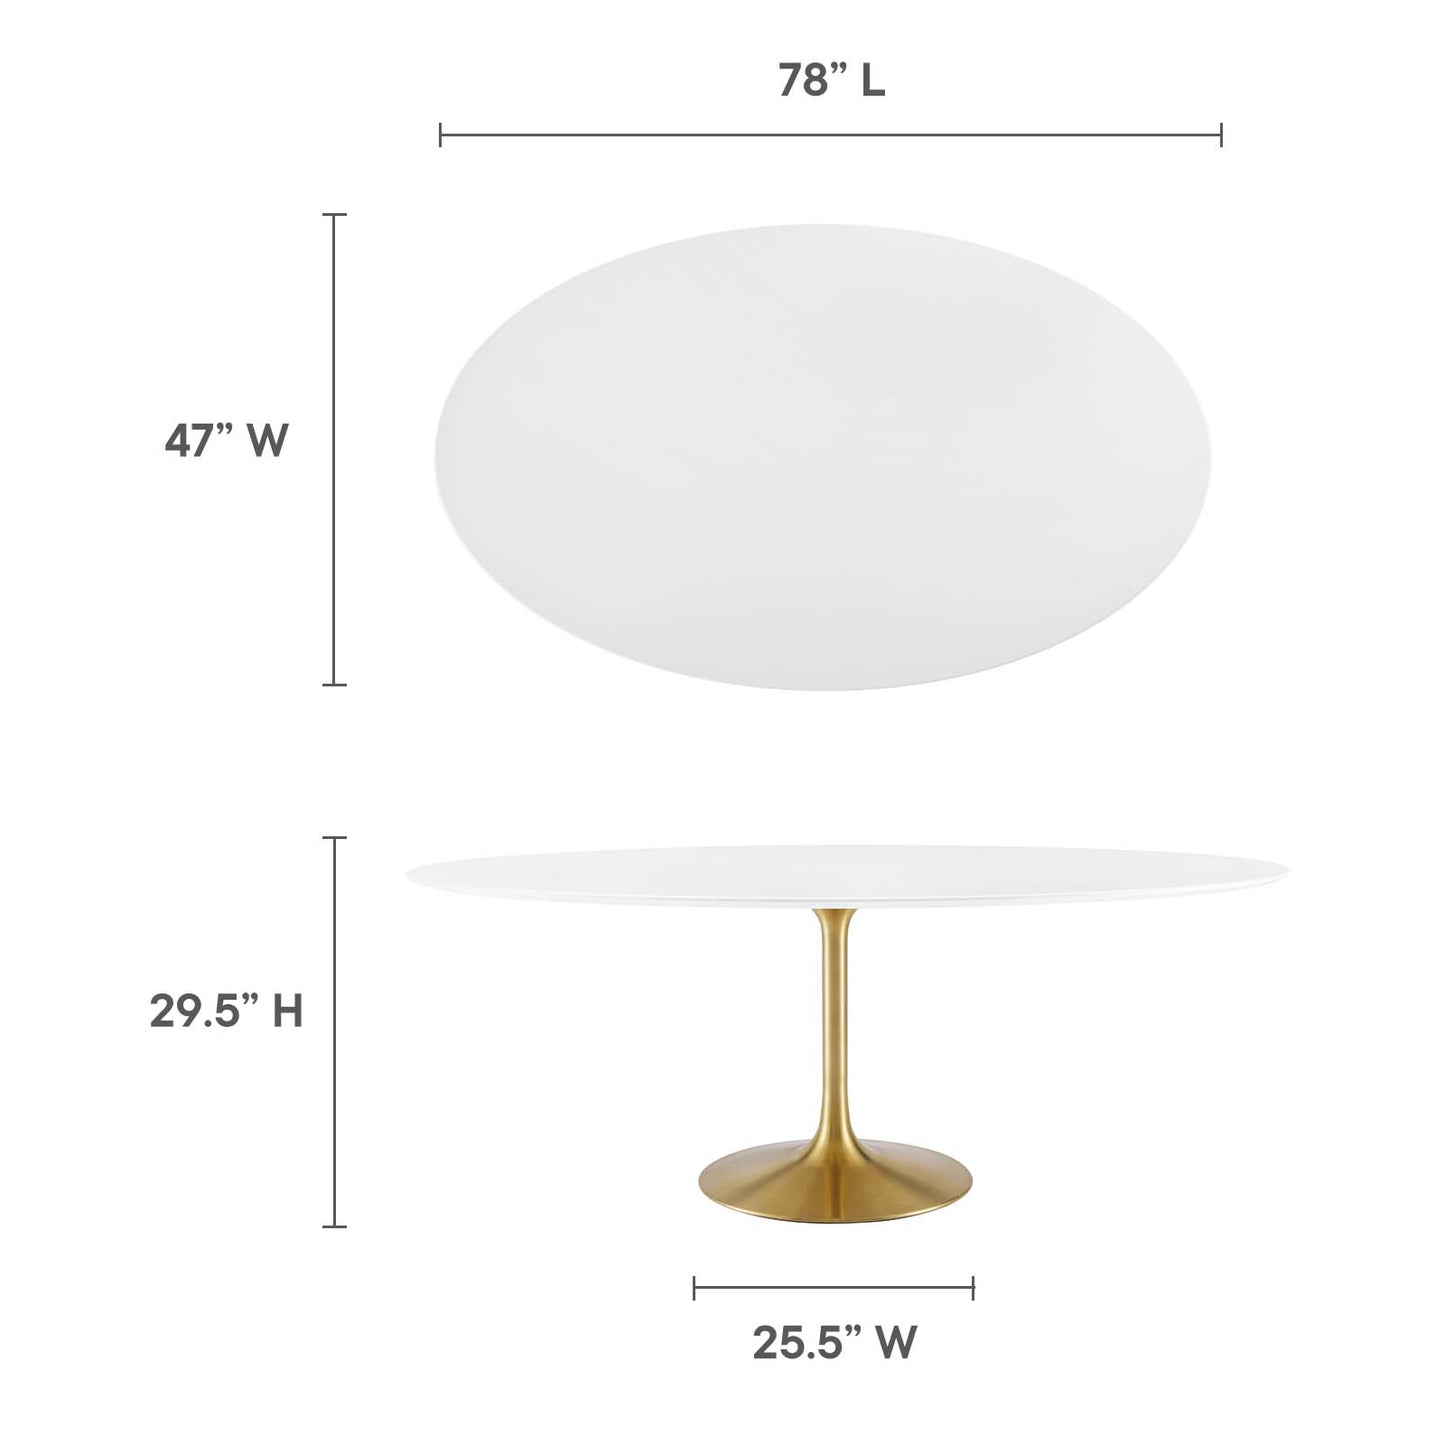 Modway Lippa 78" Oval Wood Top Dining Table in Gold White - EEI-3255